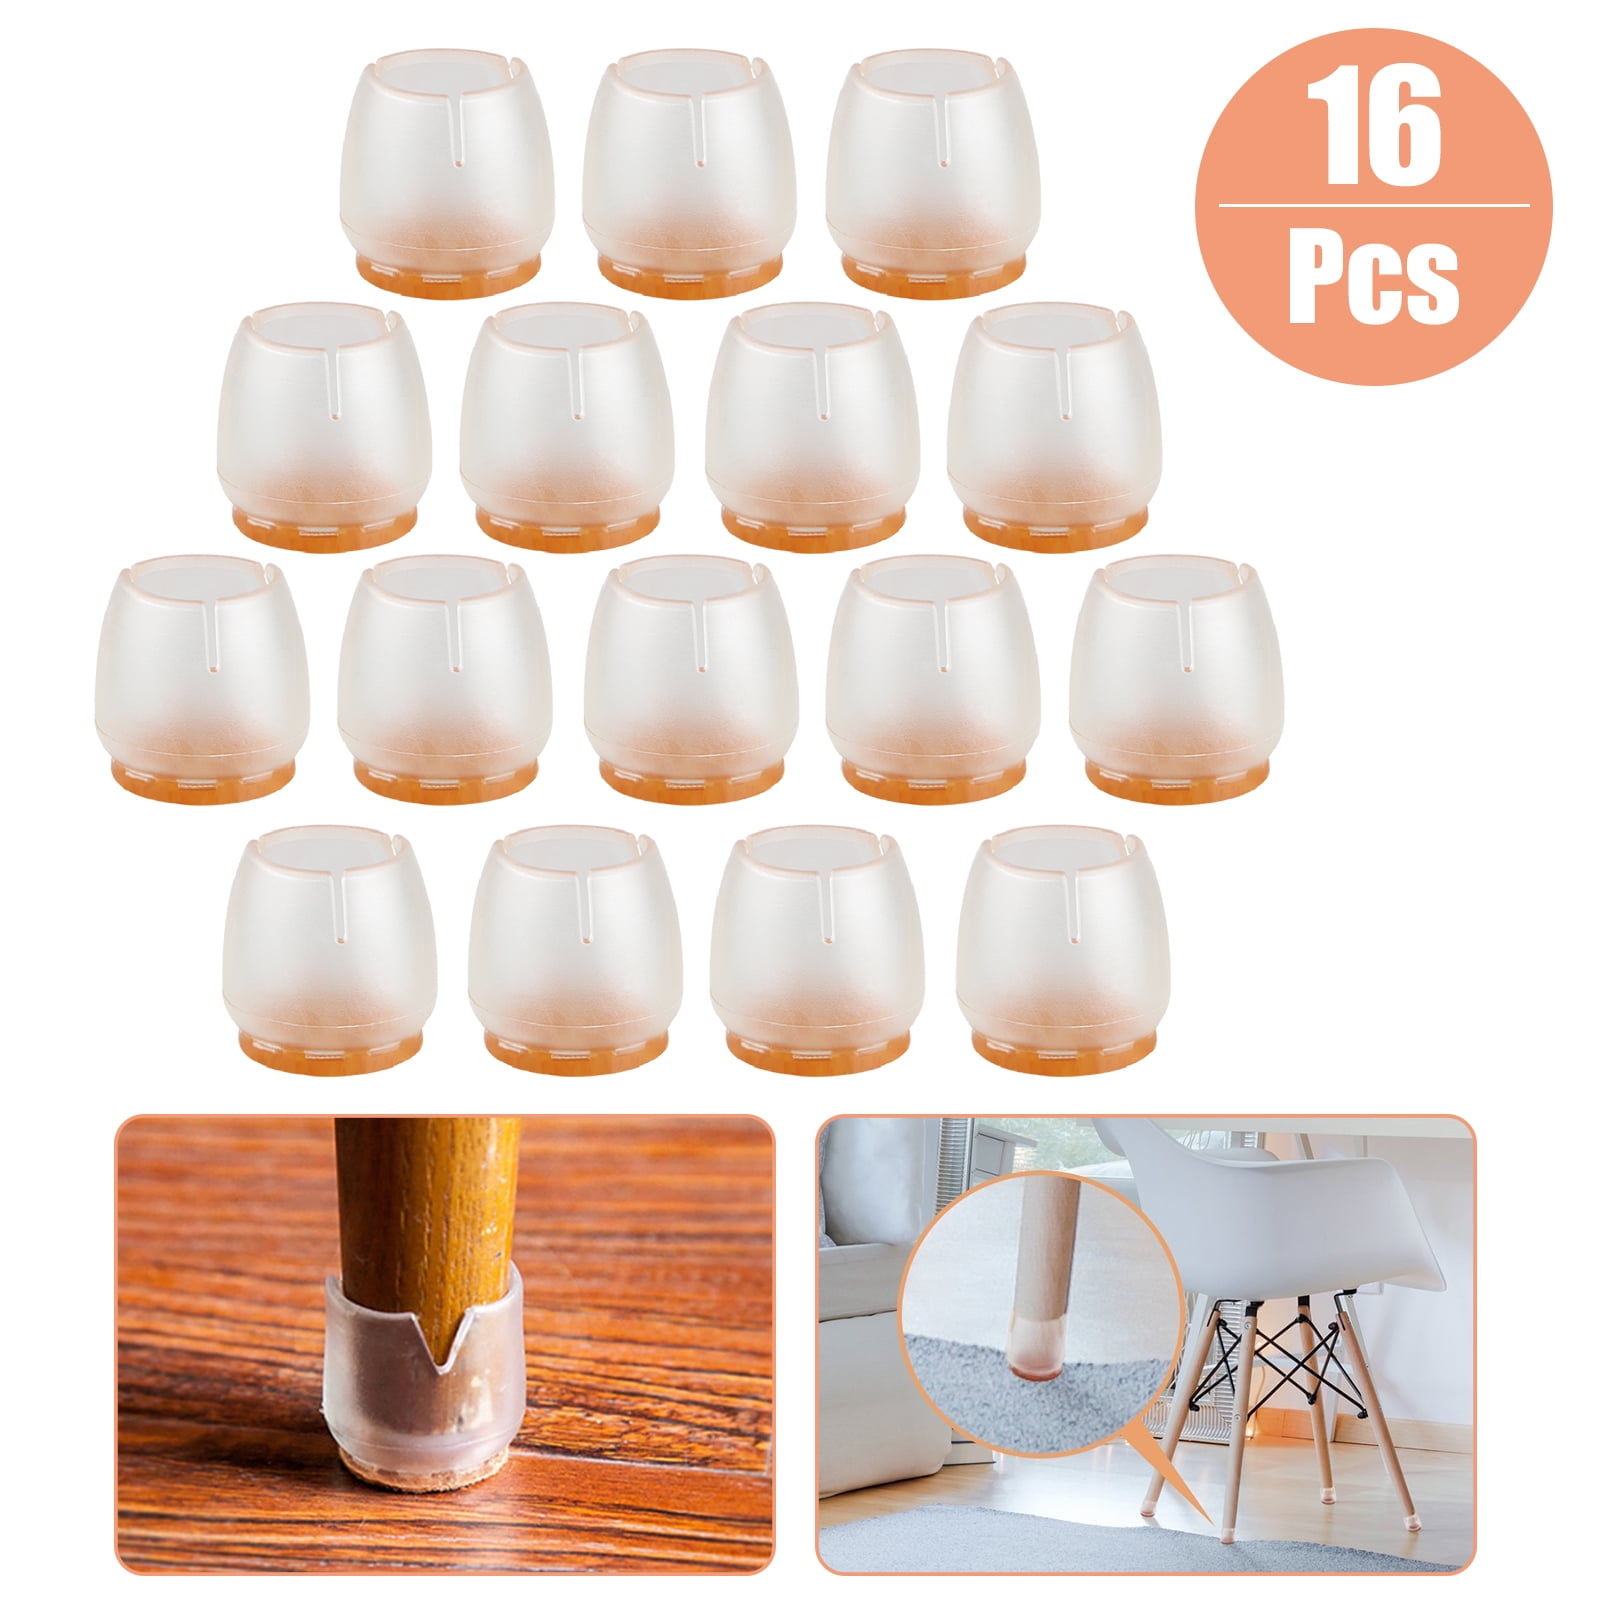 16 Pcs Chair Leg Silicone Cap Pad Furniture Table Feet Cover Floor Protector 